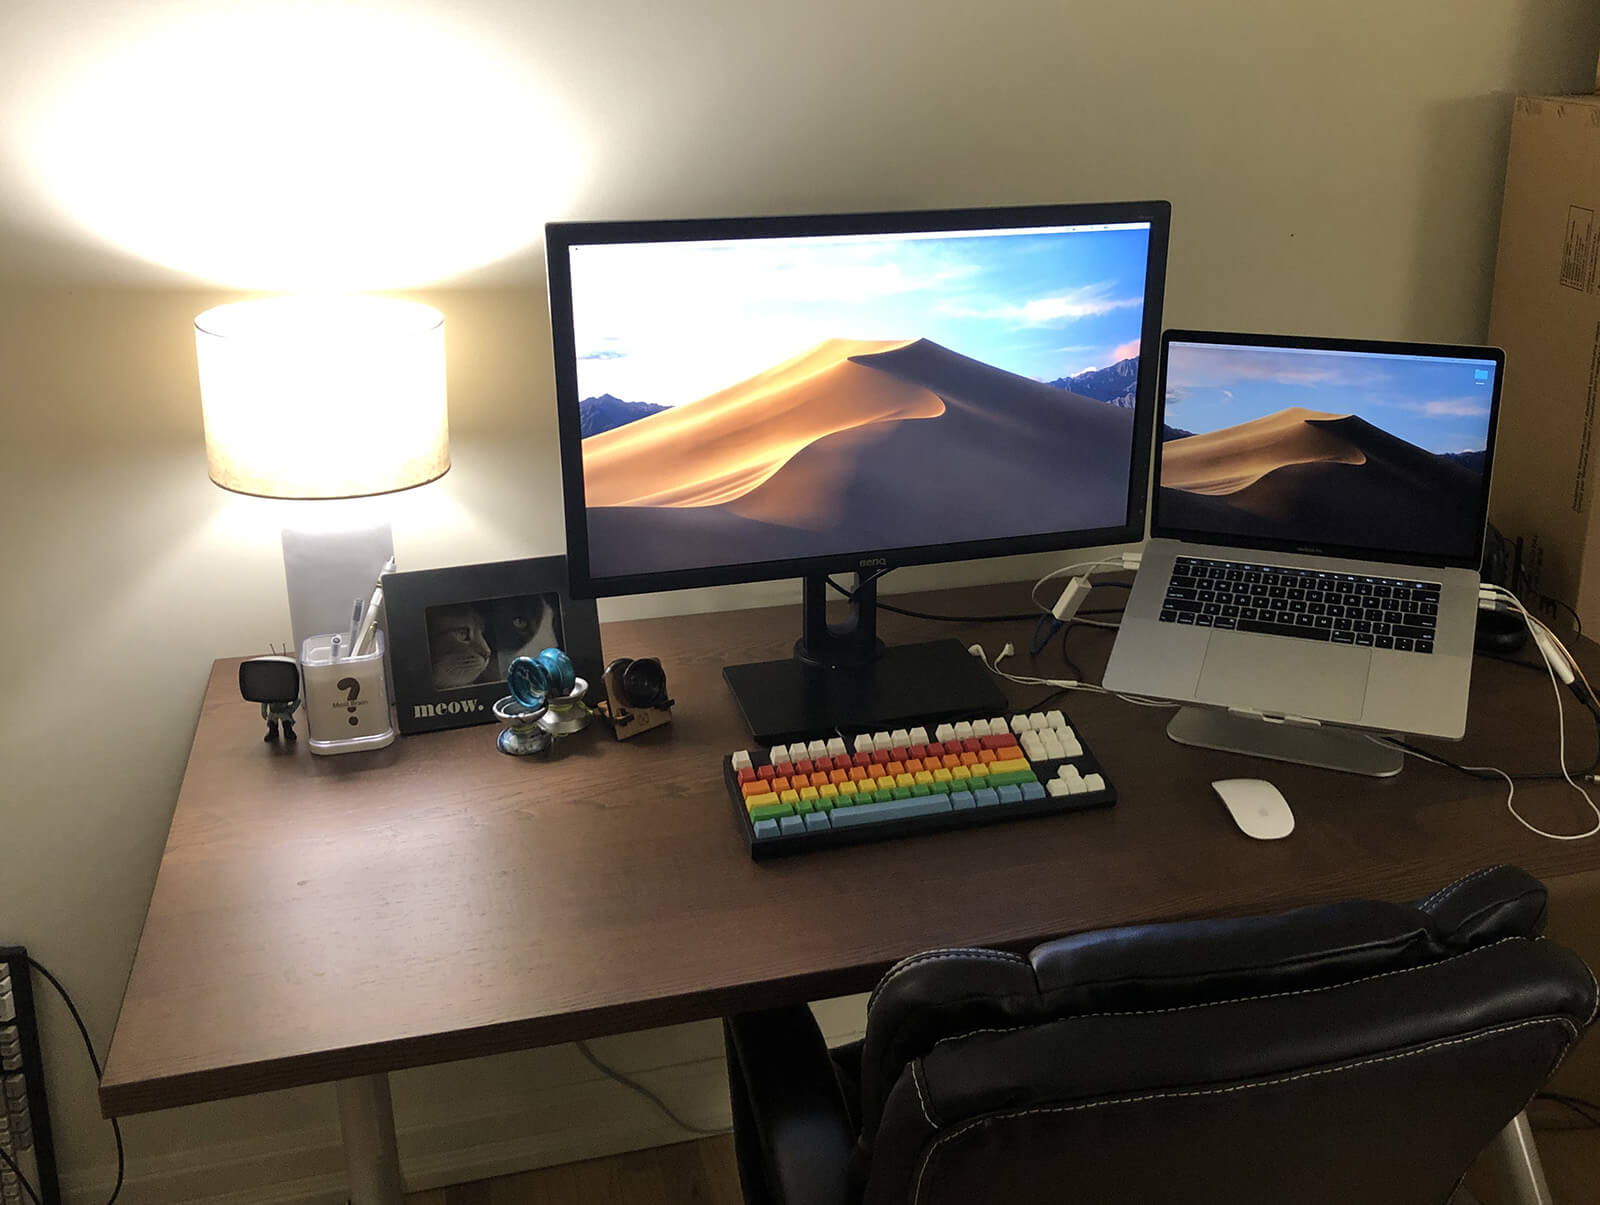 A large wooden desk with a laptop, a monitor, a rainbow keyboard, and some desk toys